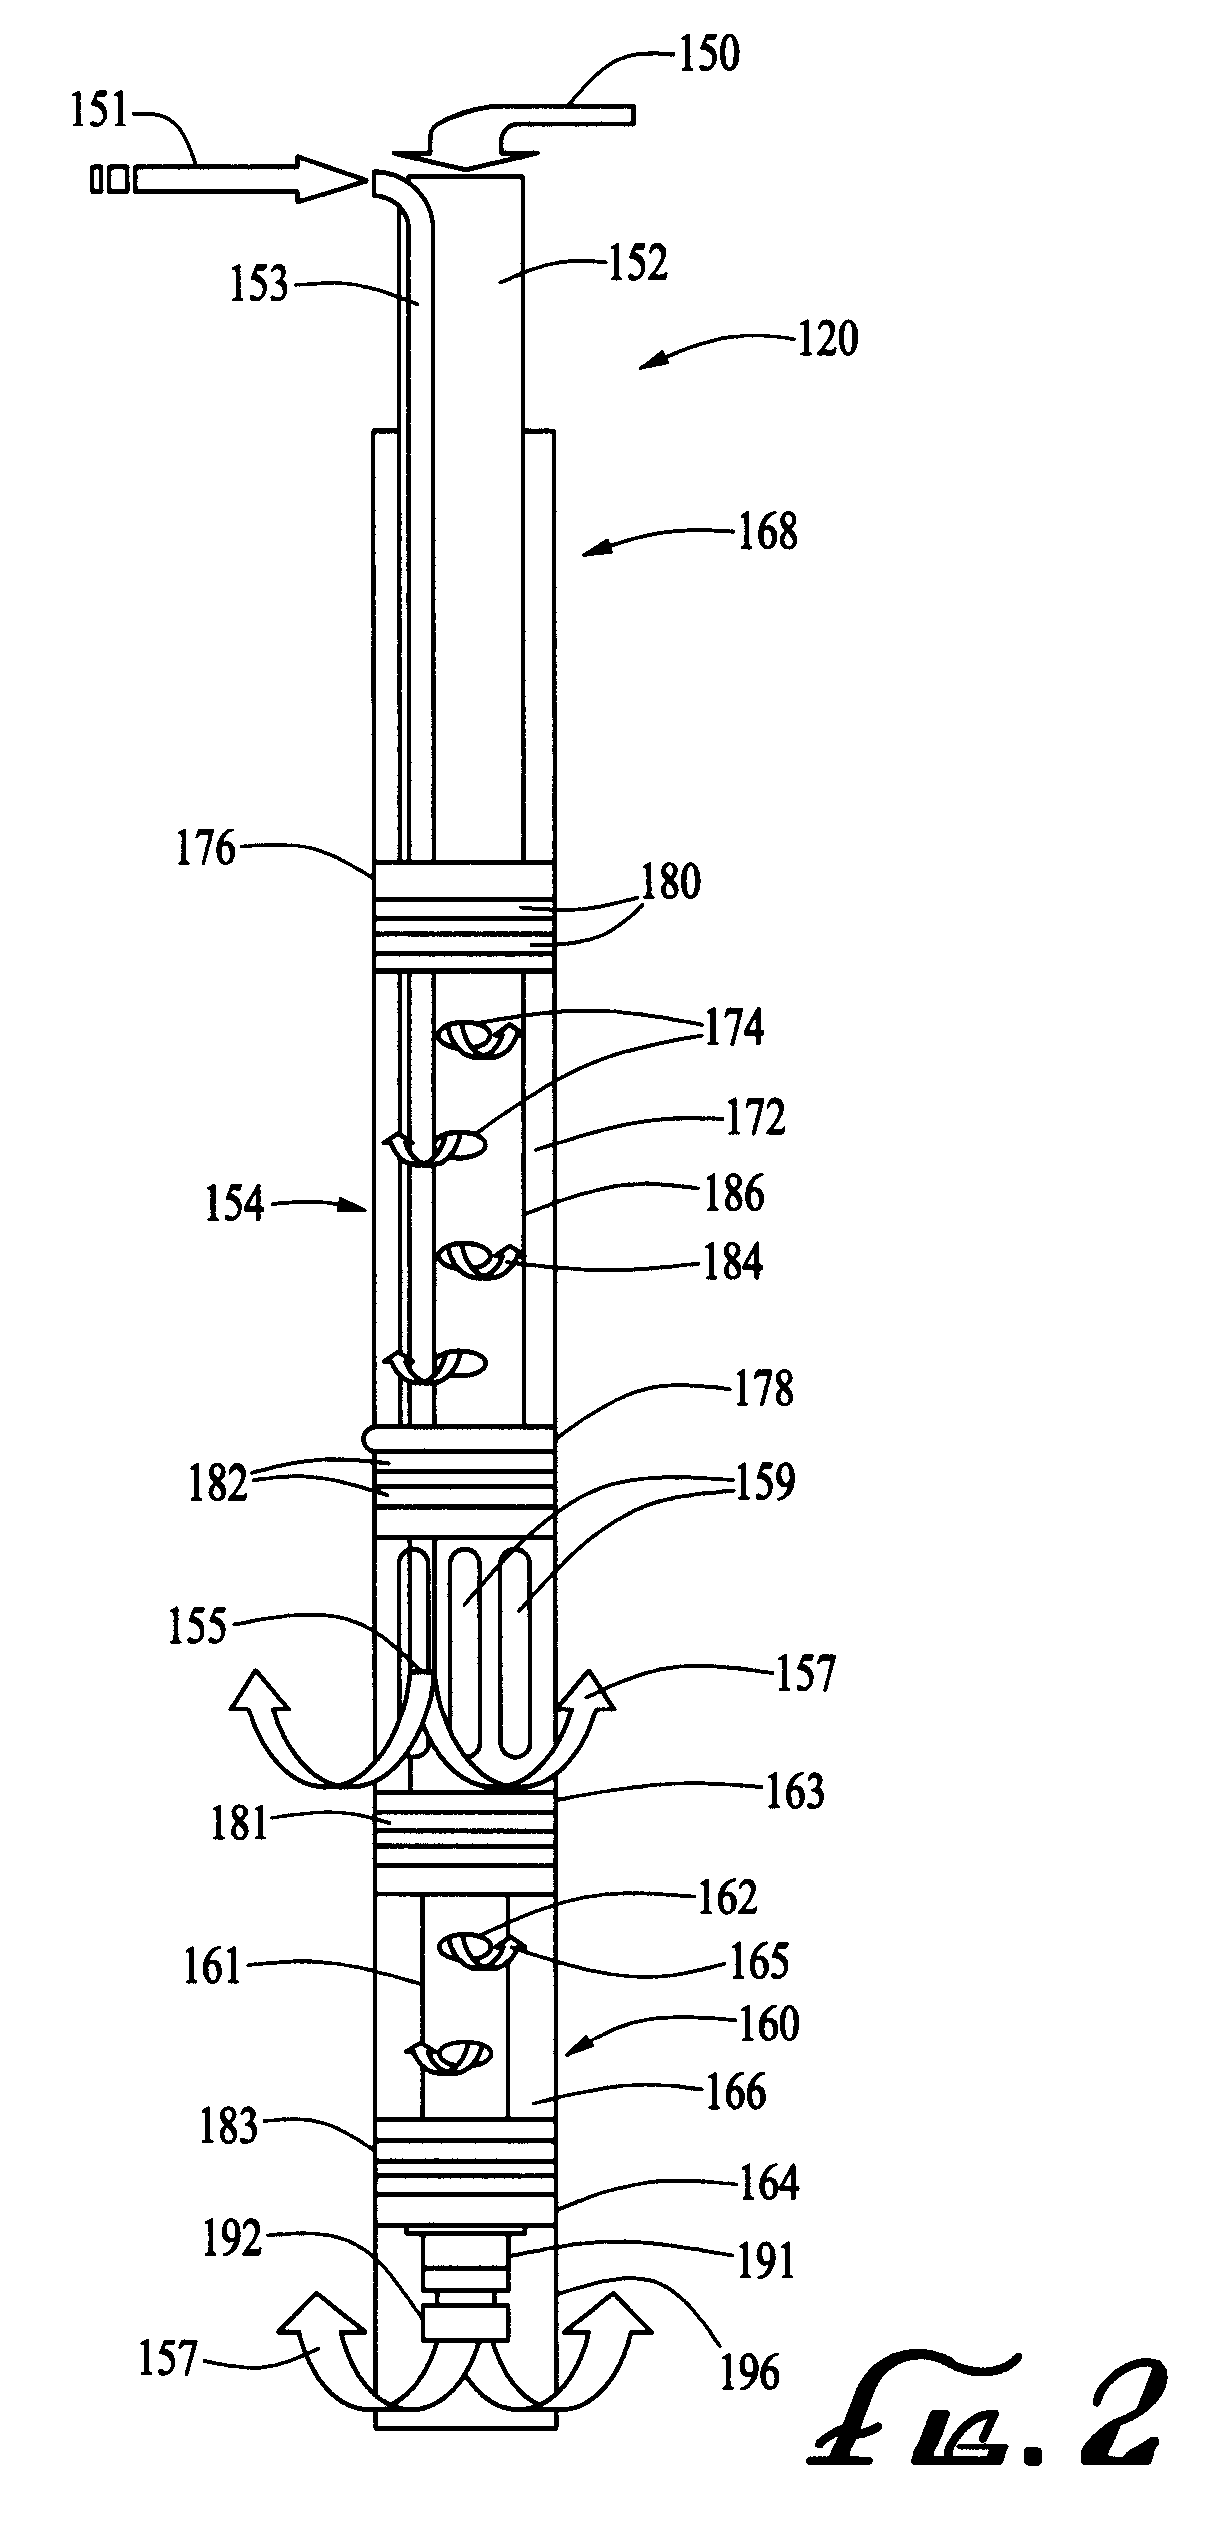 Chemical injection using an adjustable depth air sparging system